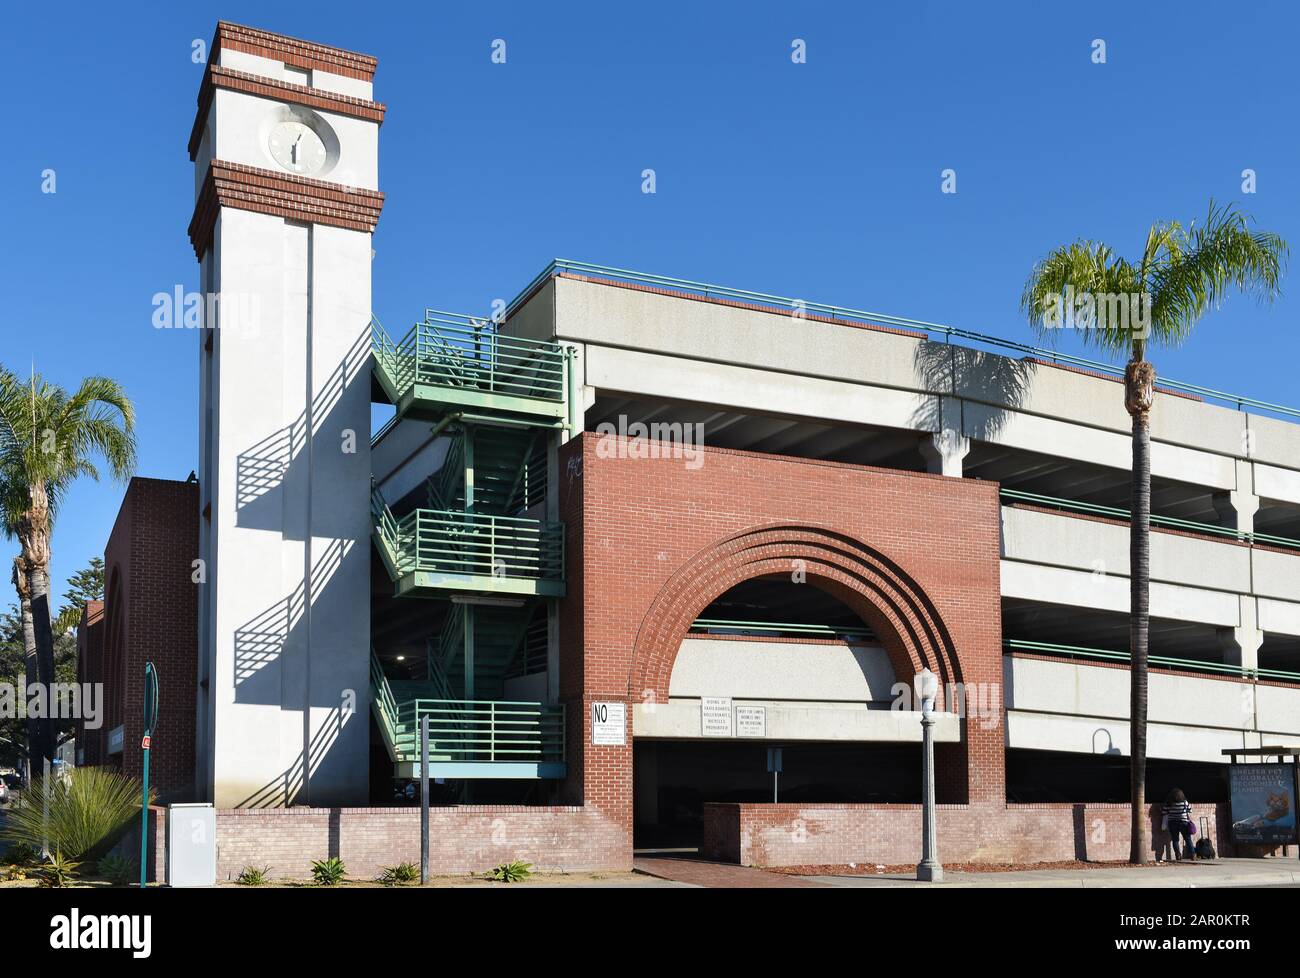 FULLERTON, CALIFORNIA - 24 JAN 2020: Parking structure in the downtown area of Fullerton near the Train Station at Santa Fe Avenue and Pomona Avenue. Stock Photo